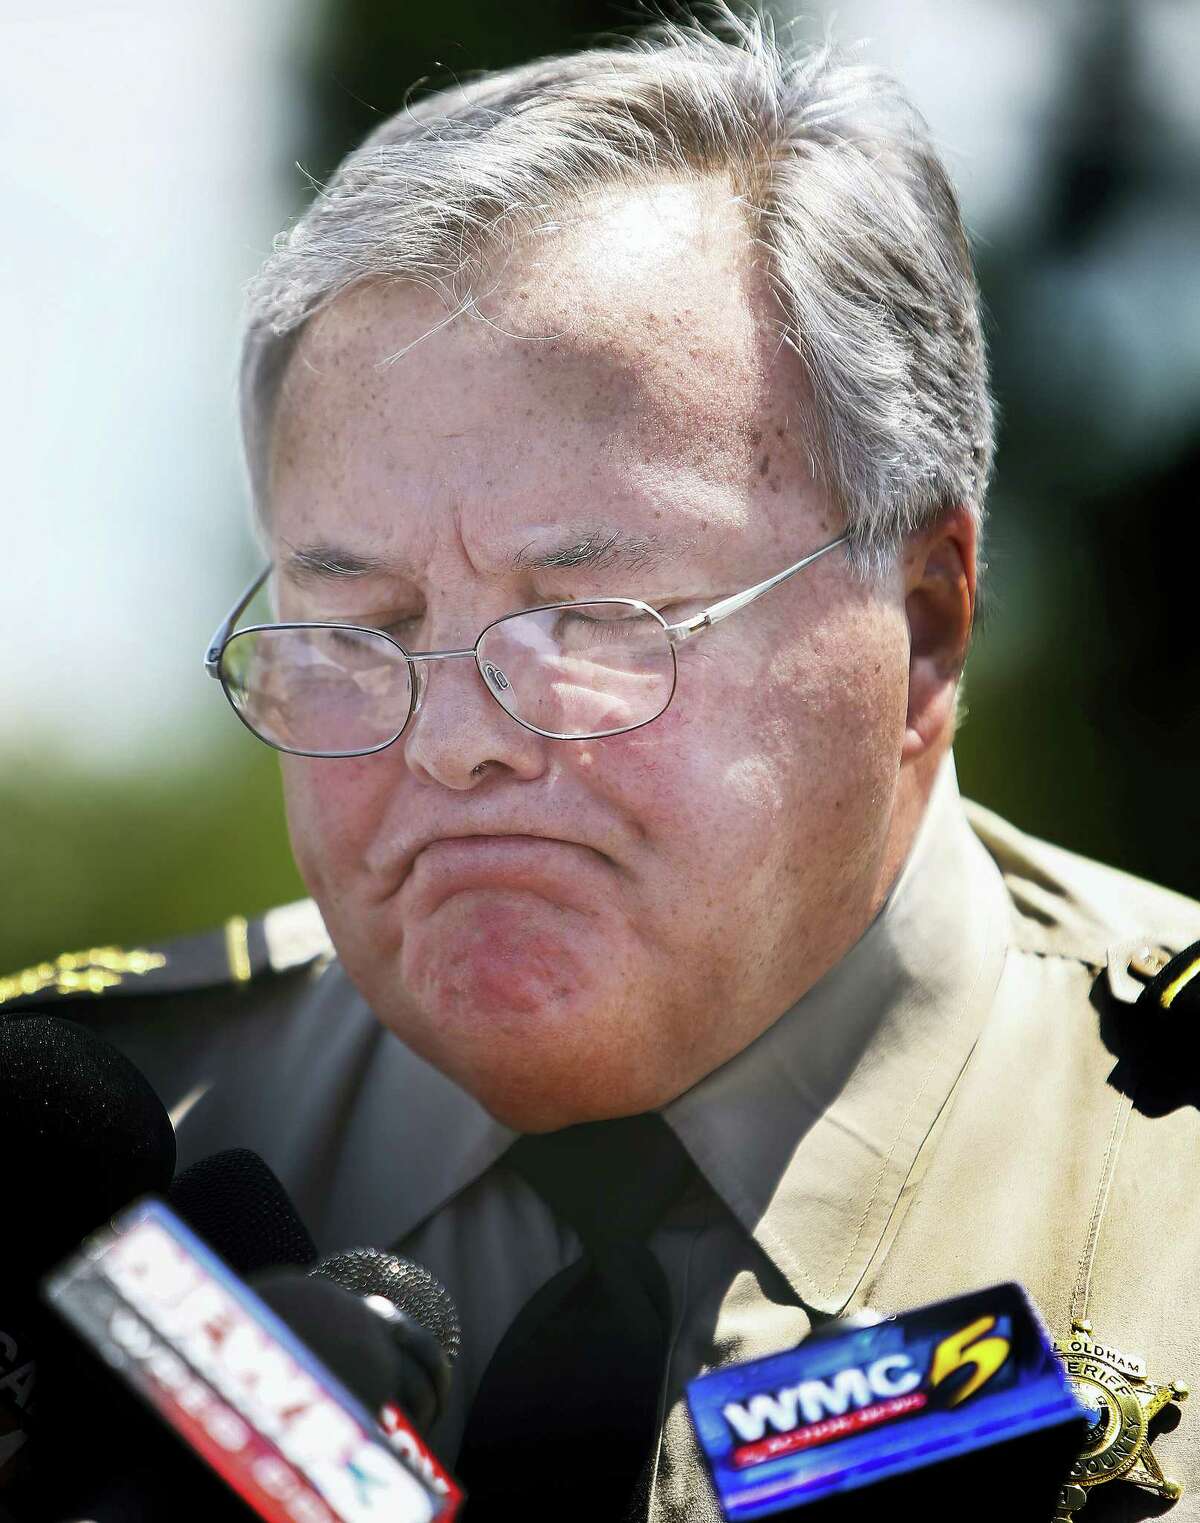 Shelby County Sheriff Bill Oldham talks to reporters Friday, July 1, 2016, about the stabbing deaths of four children in suburban Memphis, Tenn. “This is an egregious act of evil that has shocked us to our core,” Oldham said. “I will never understand how anyone can do this.”